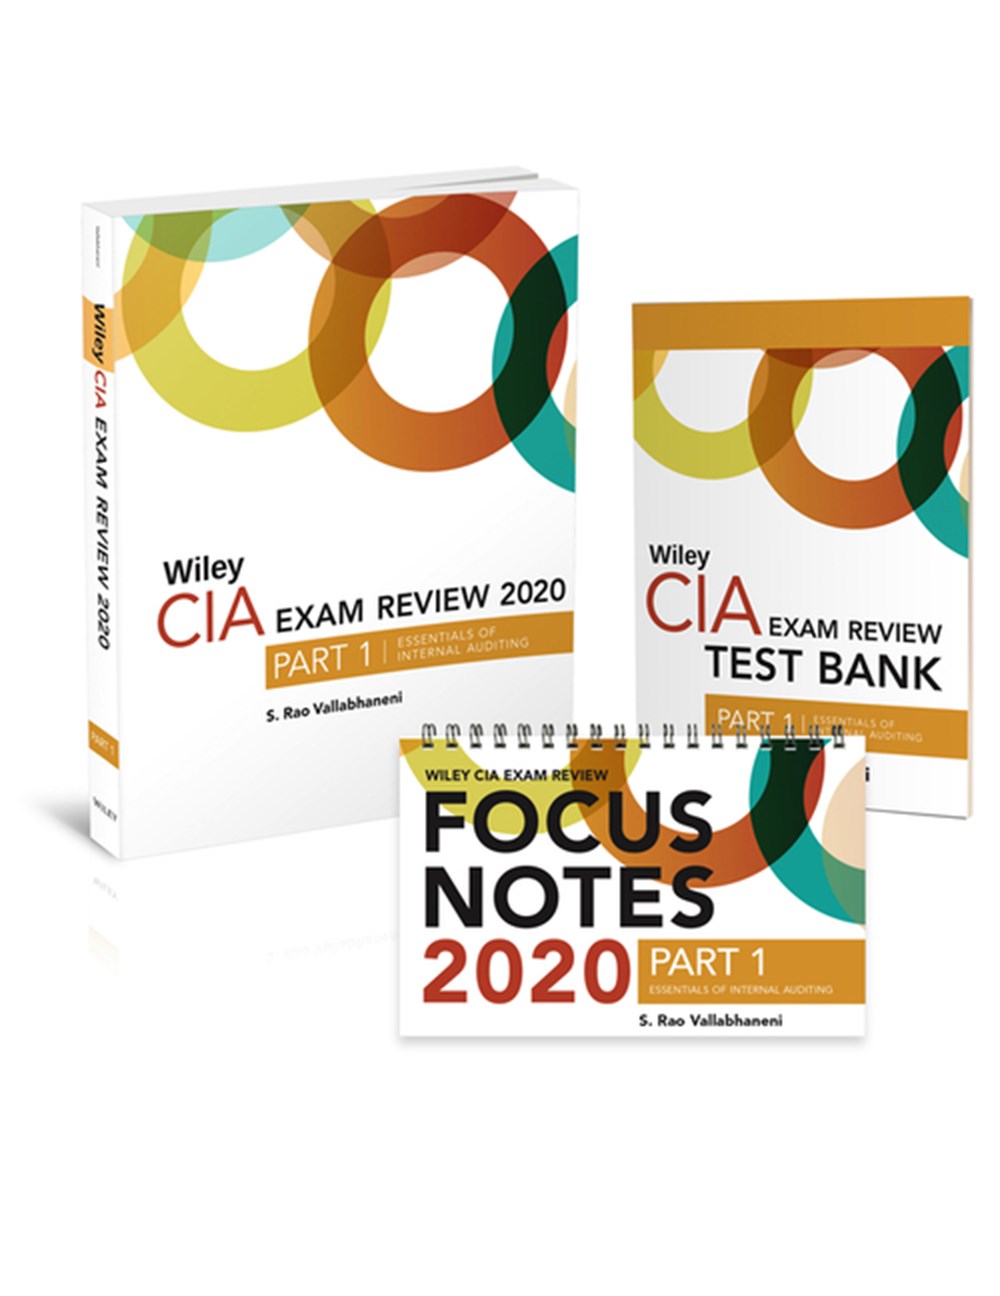 Wiley CIA Exam Review 2020 + Test Bank + Focus Notes Part 1, Essentials of Internal Auditing Set